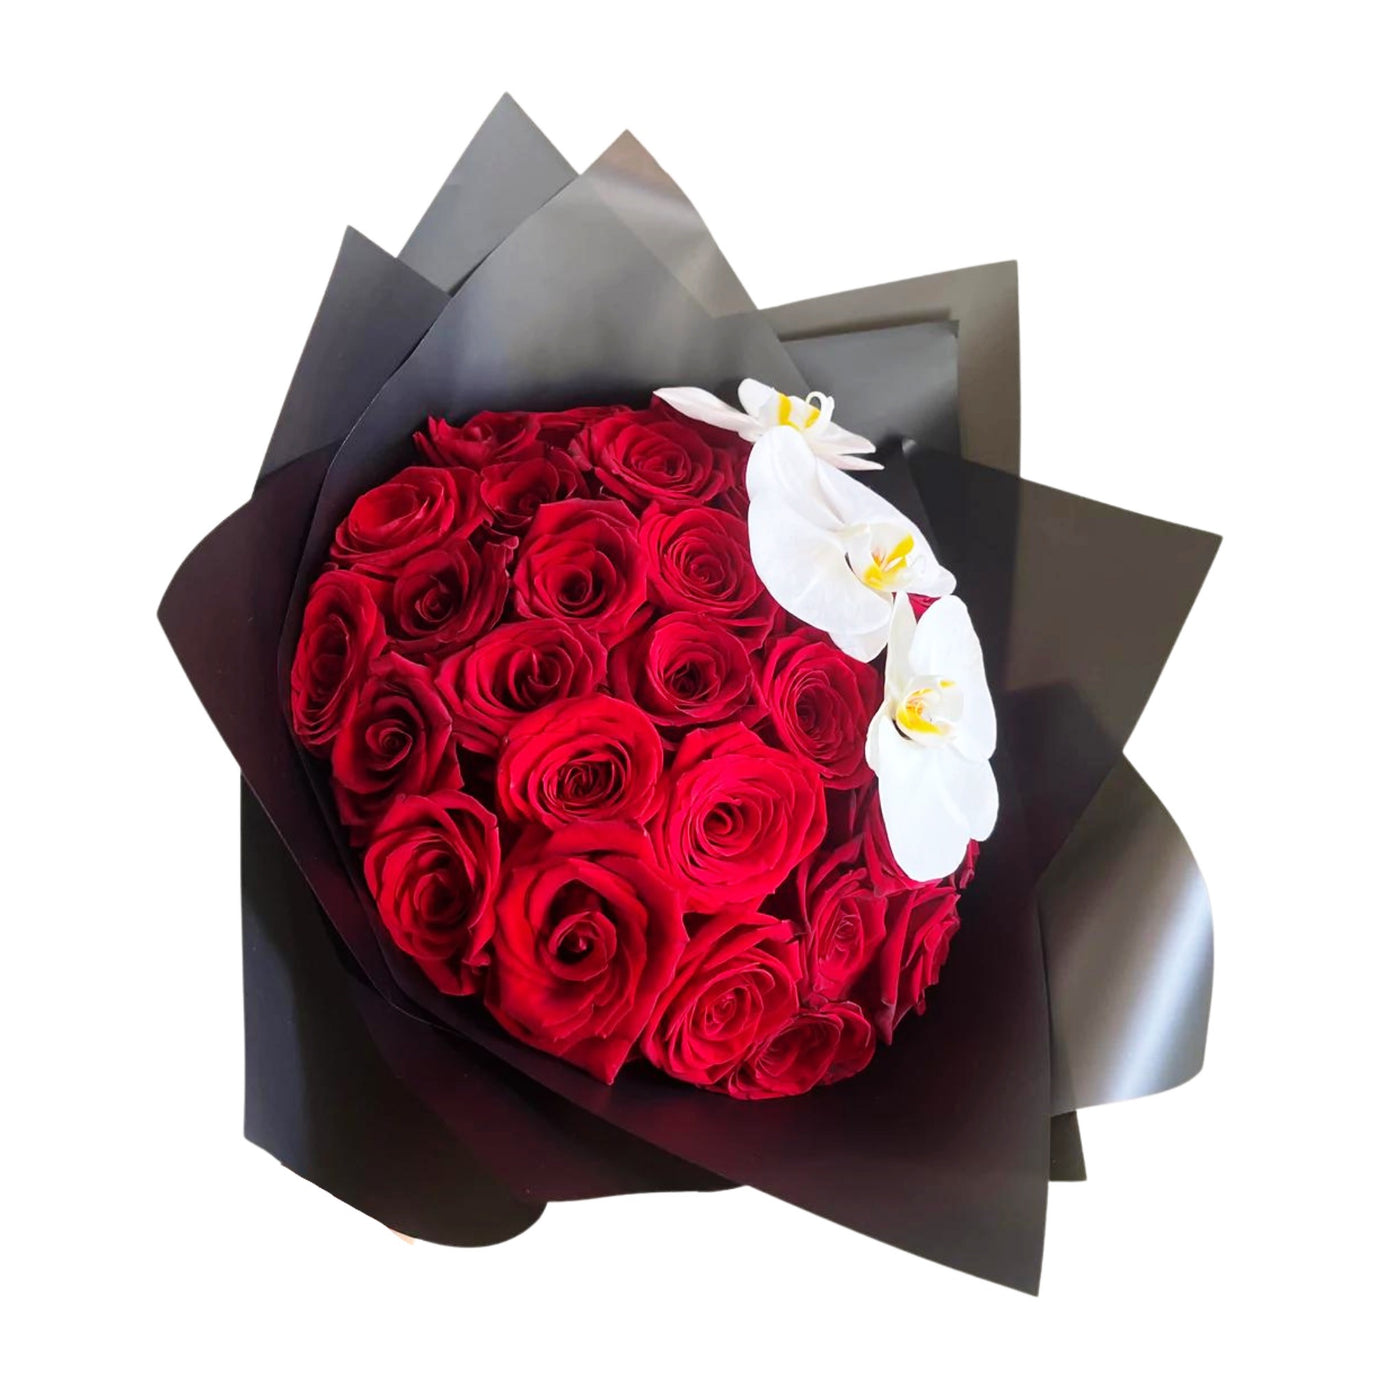 2 Dozen Red and White Rose Bouquet